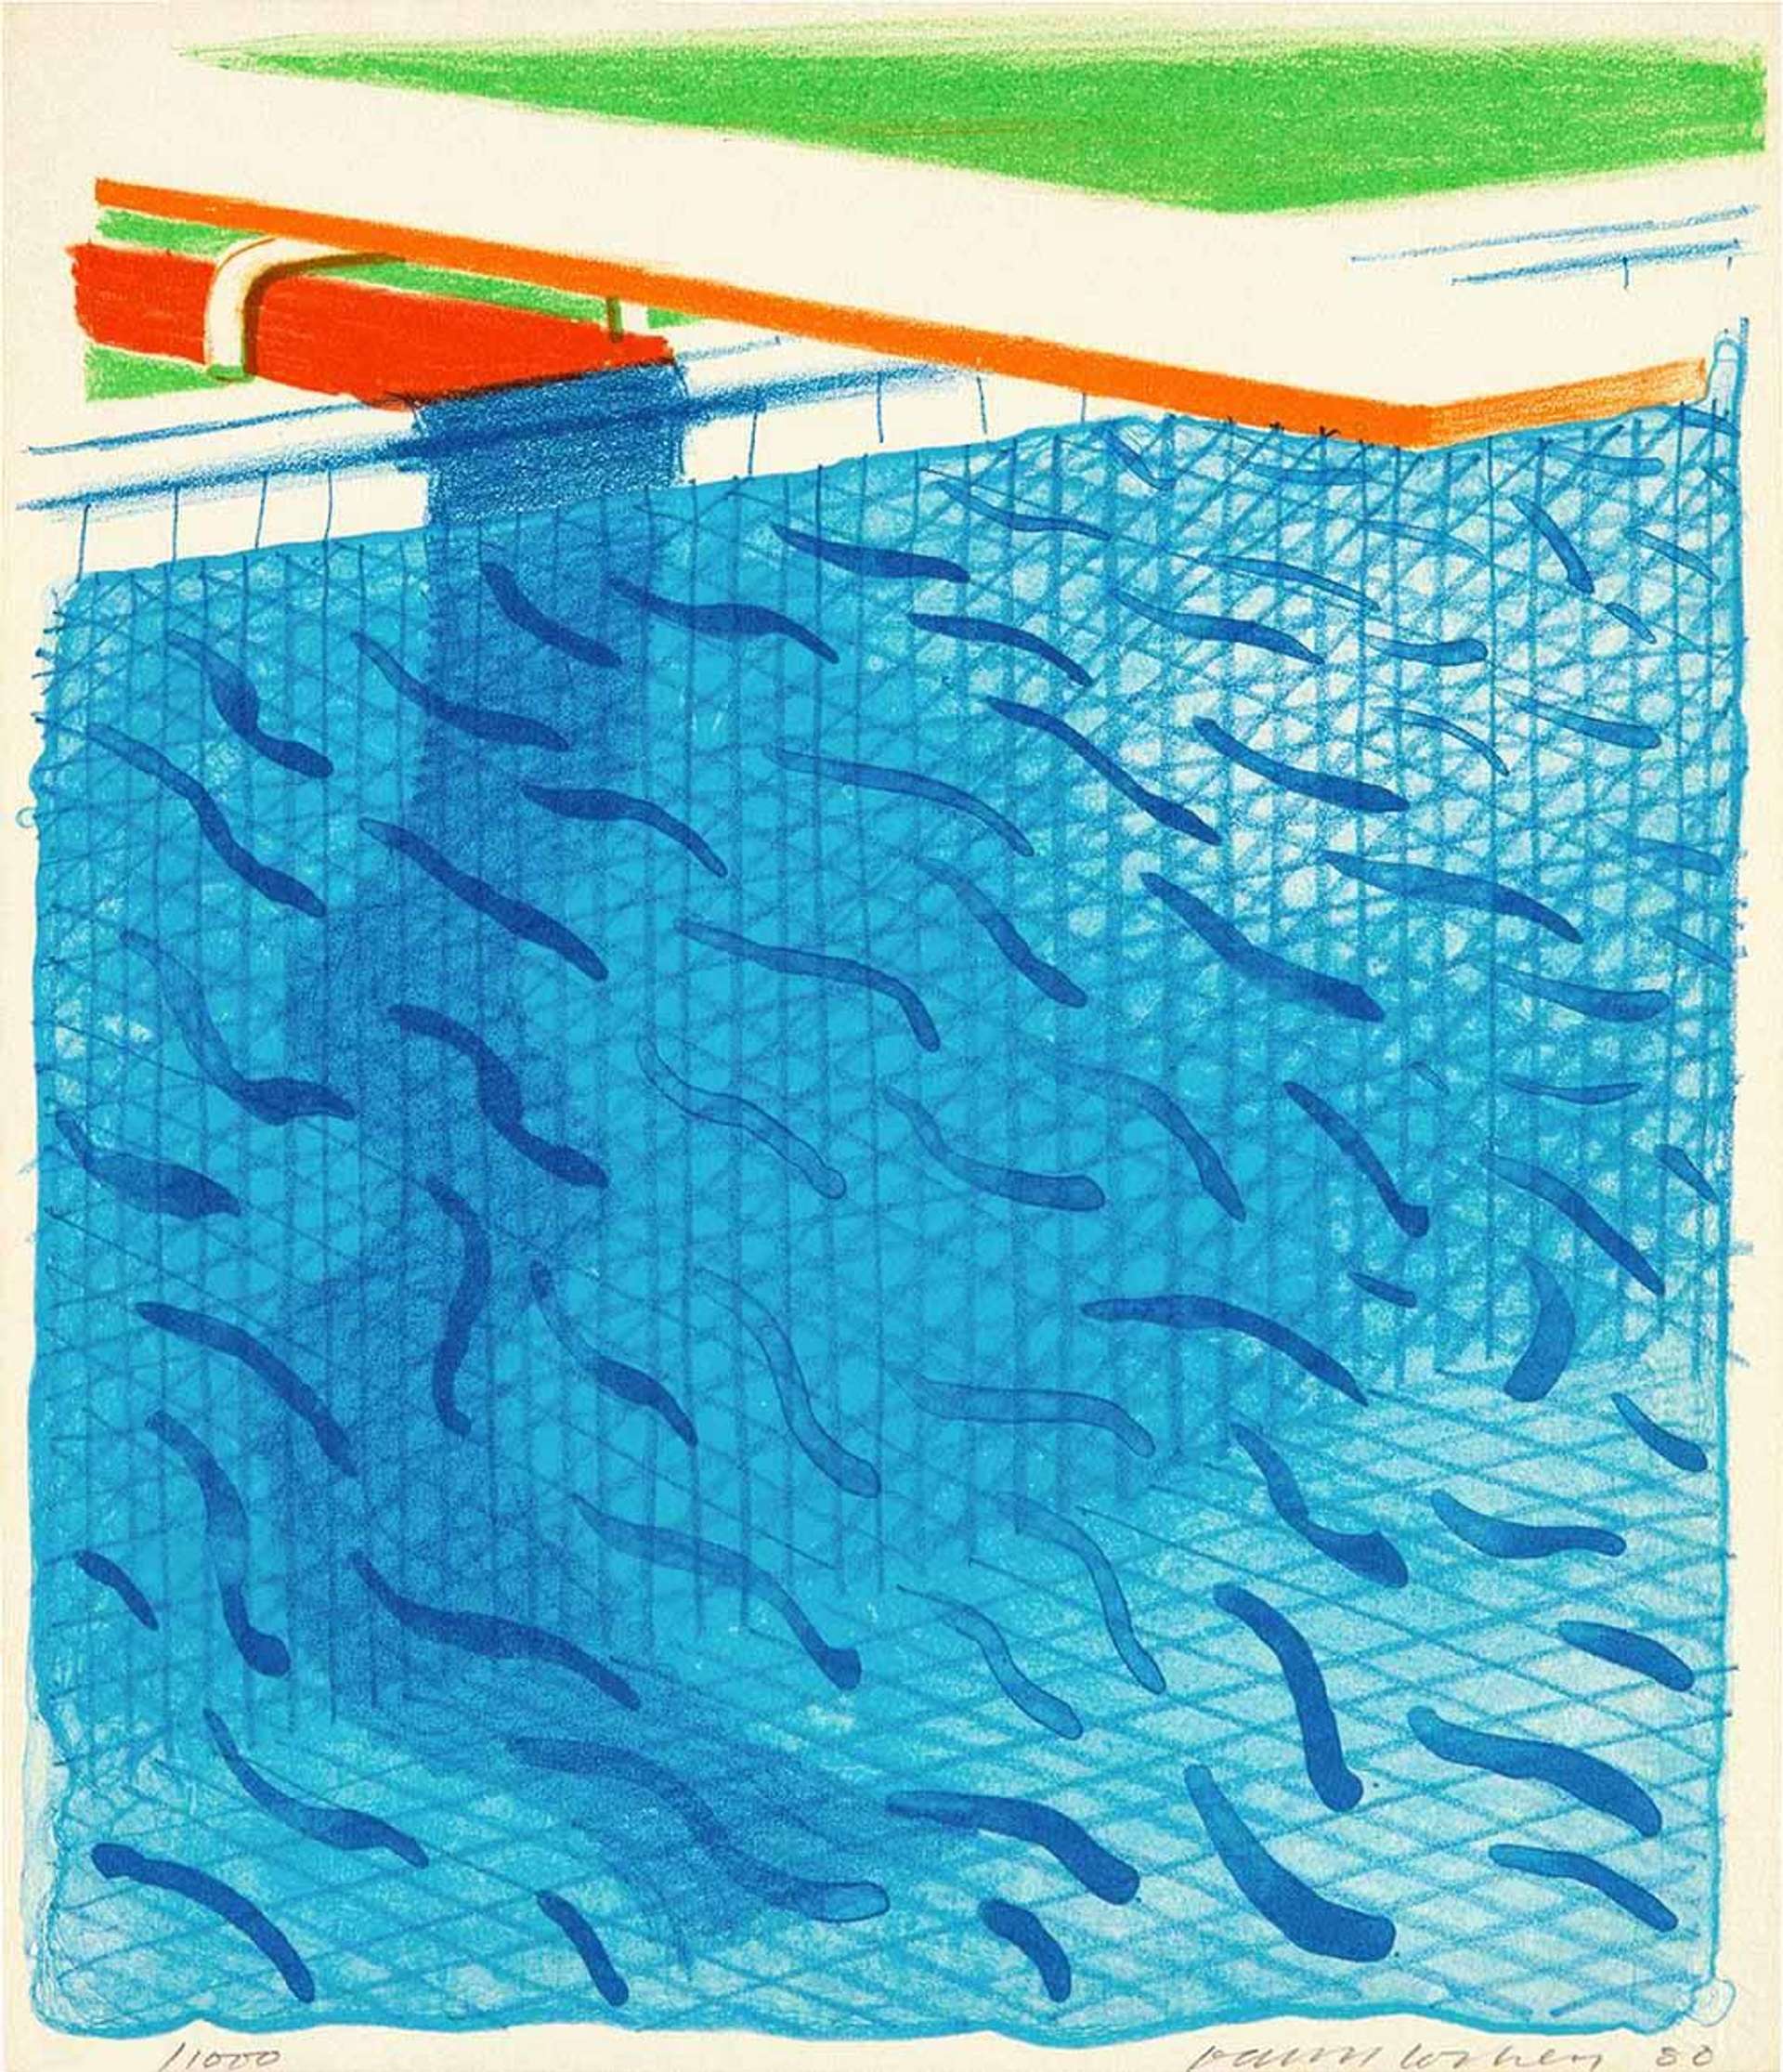 A lithograph by David Hockney depicting a blue swimming pool and diving board.